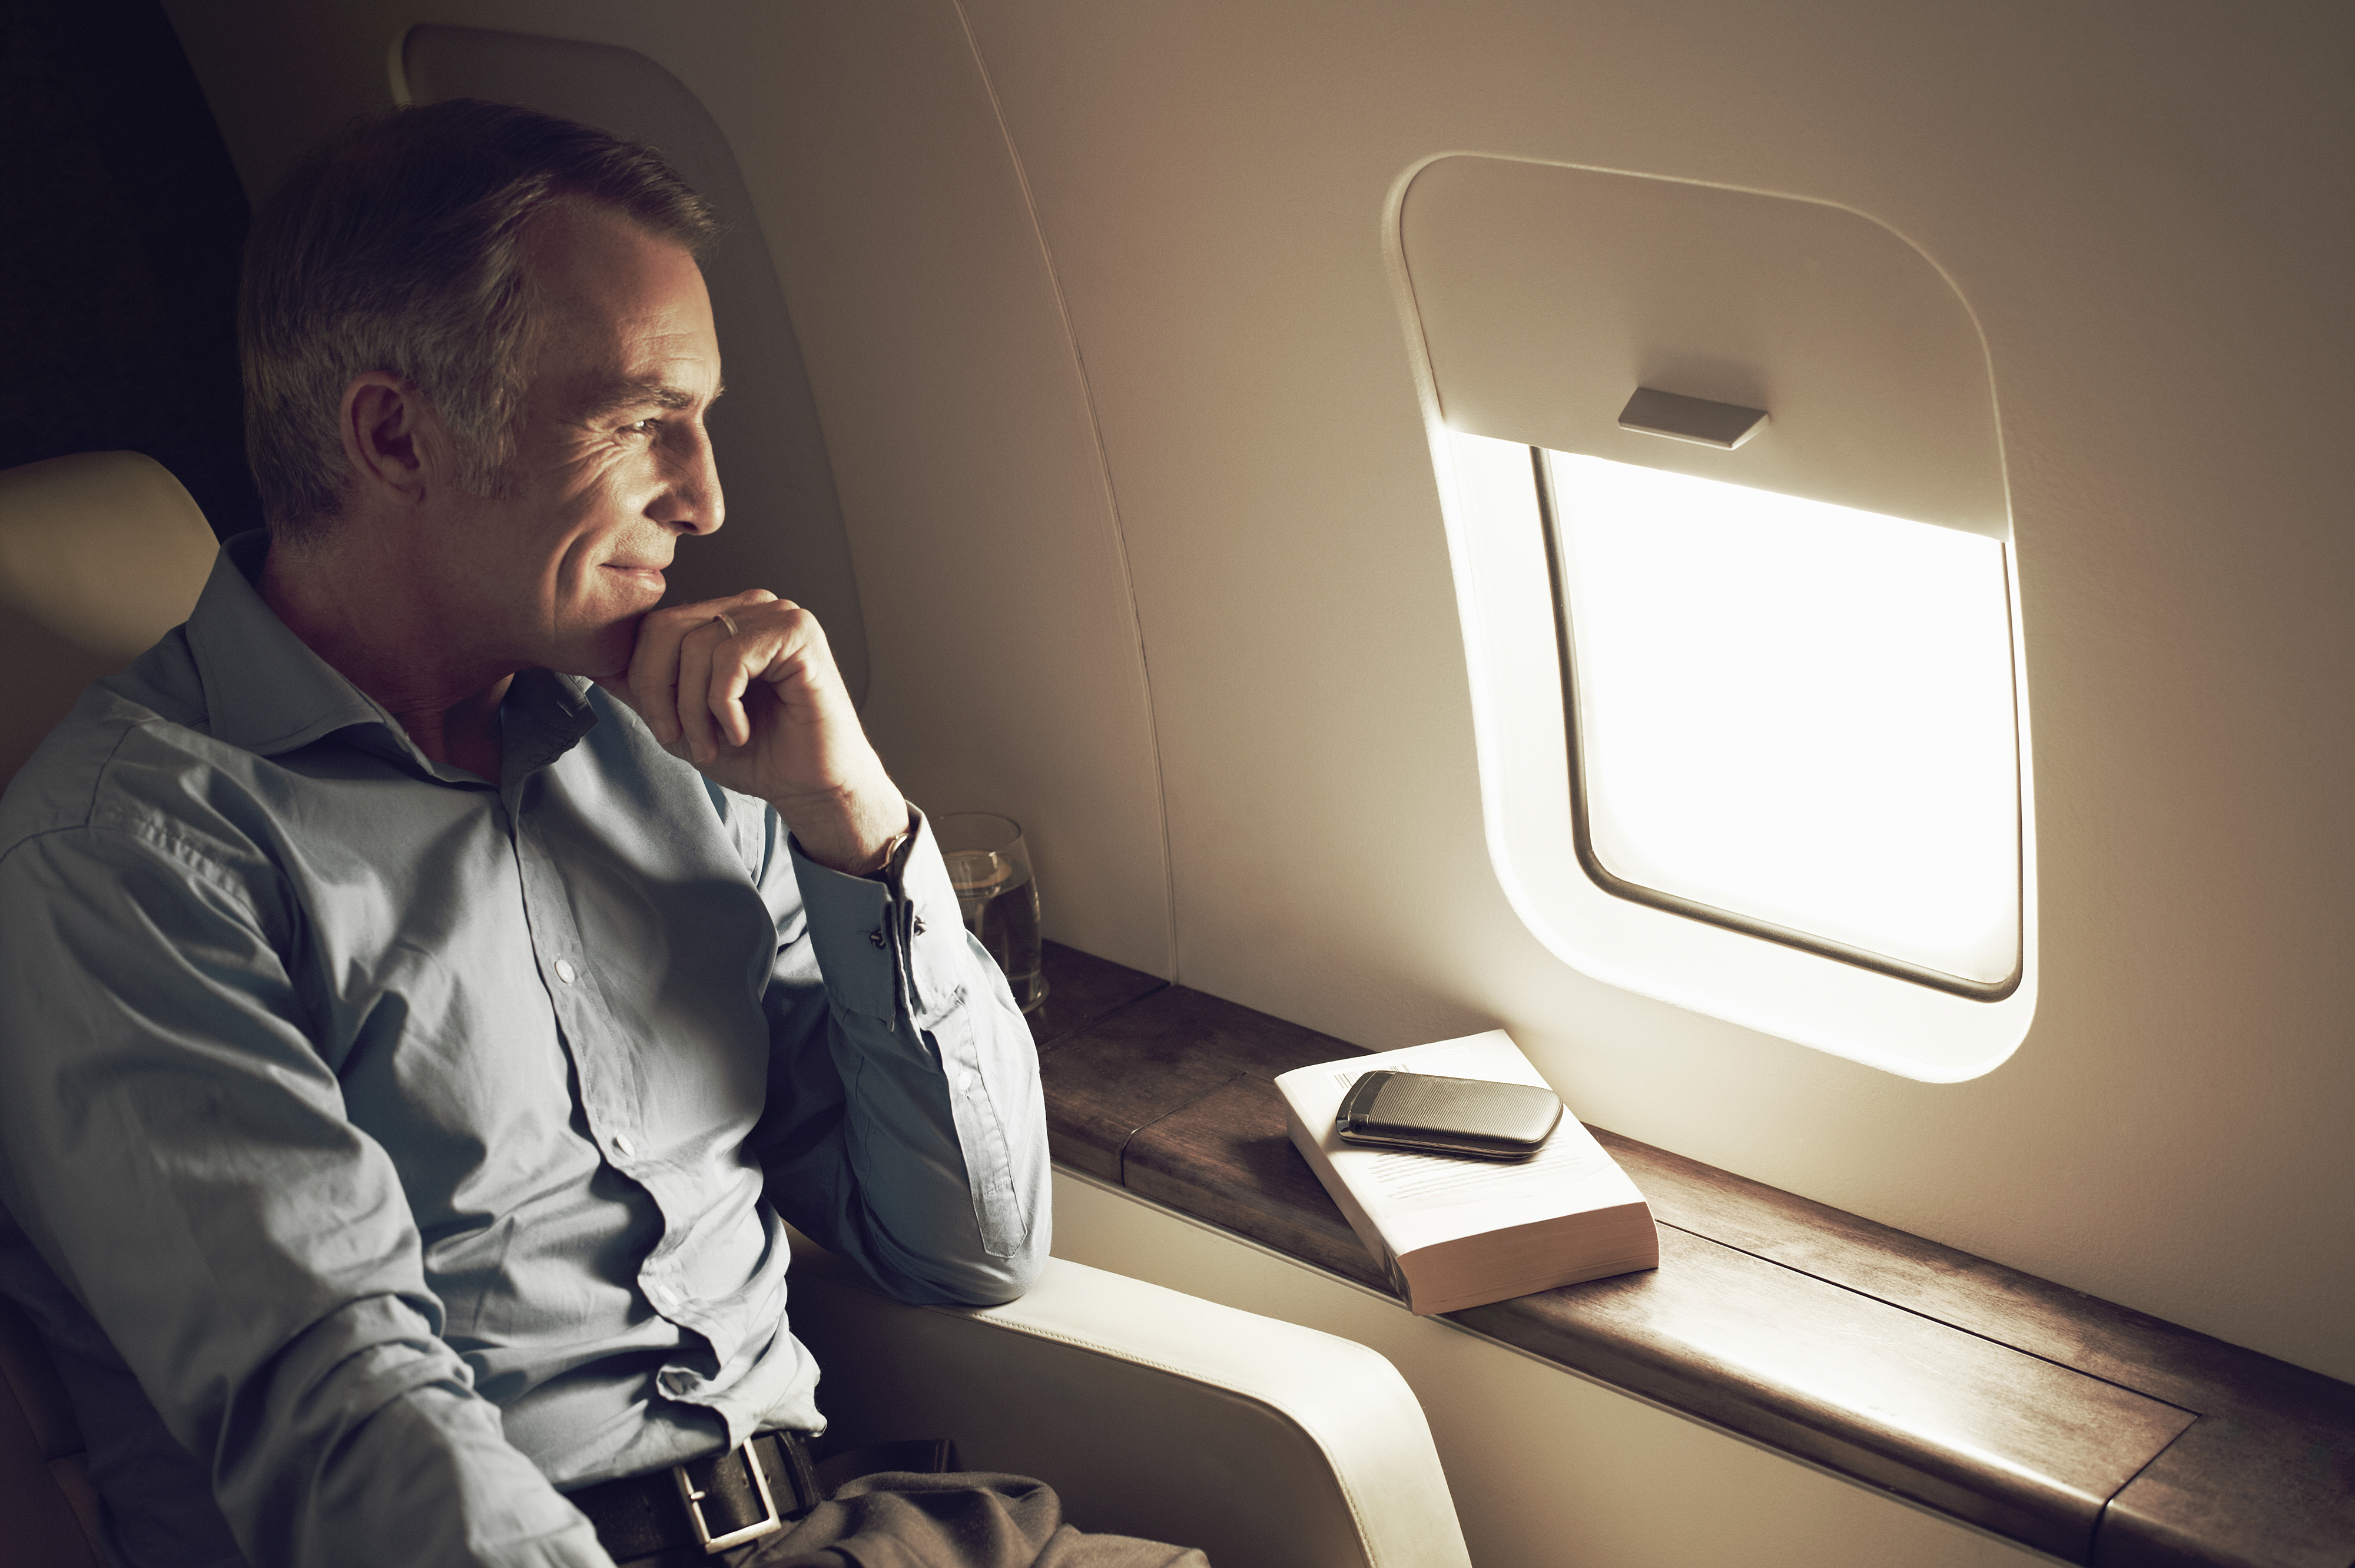 Man in business attire sitting thoughtfully by airplane window with a closed laptop on the table next to him